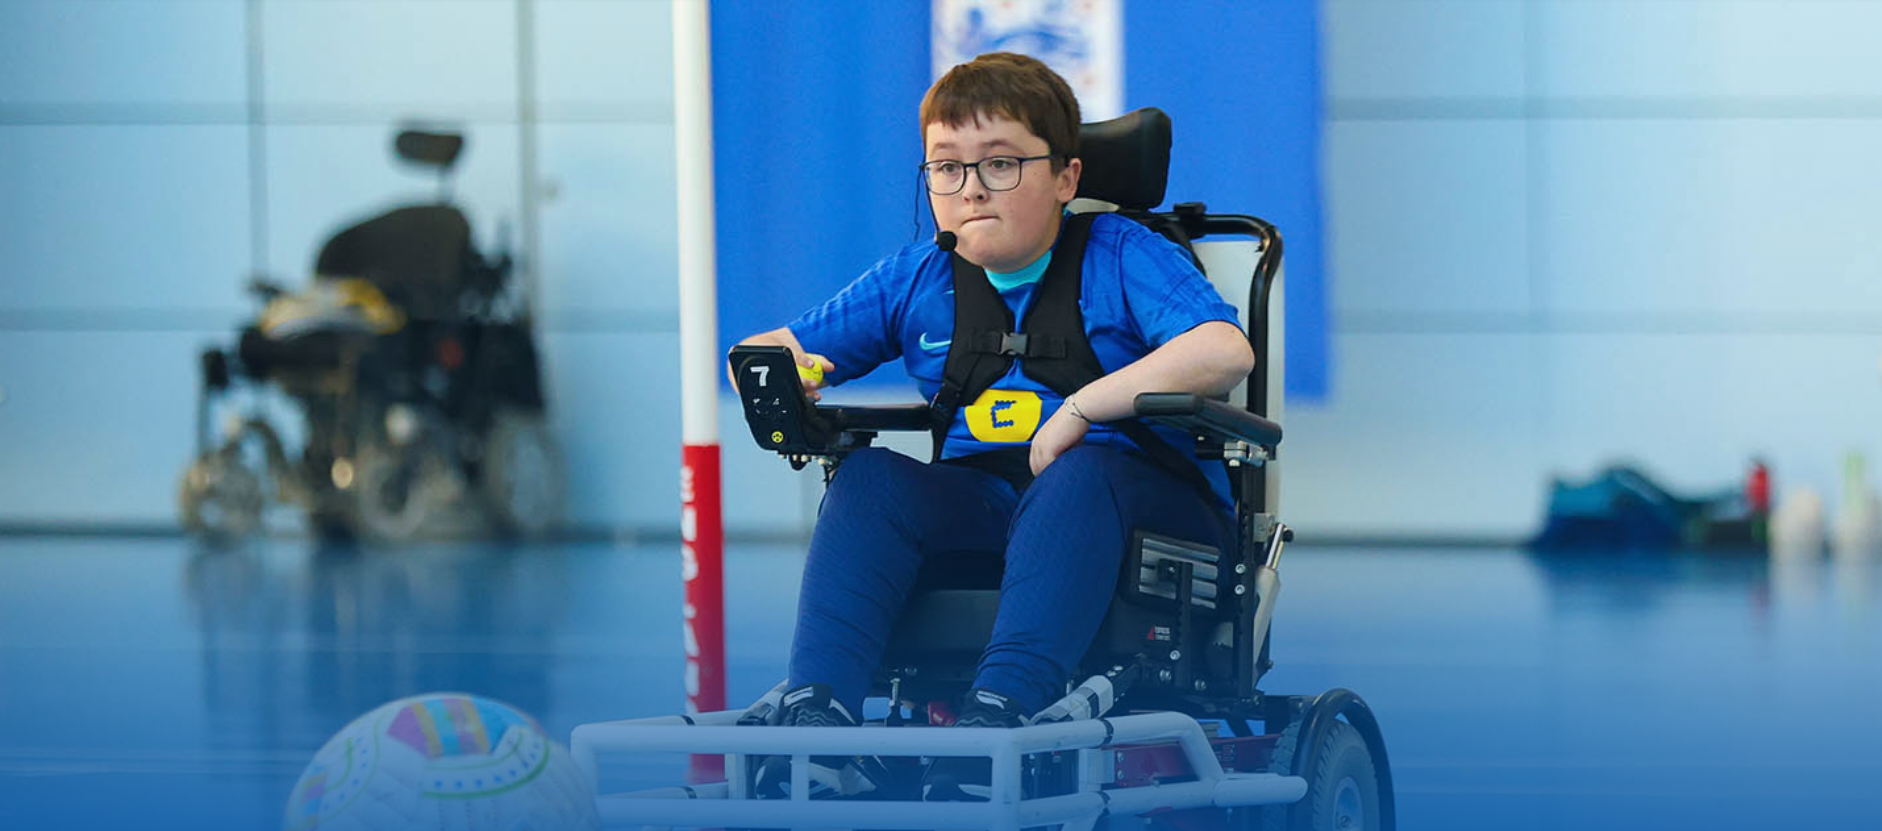 Dan McLellan's meteoric ascent to representing England at the Powerchair World Cup at the tender age of 14